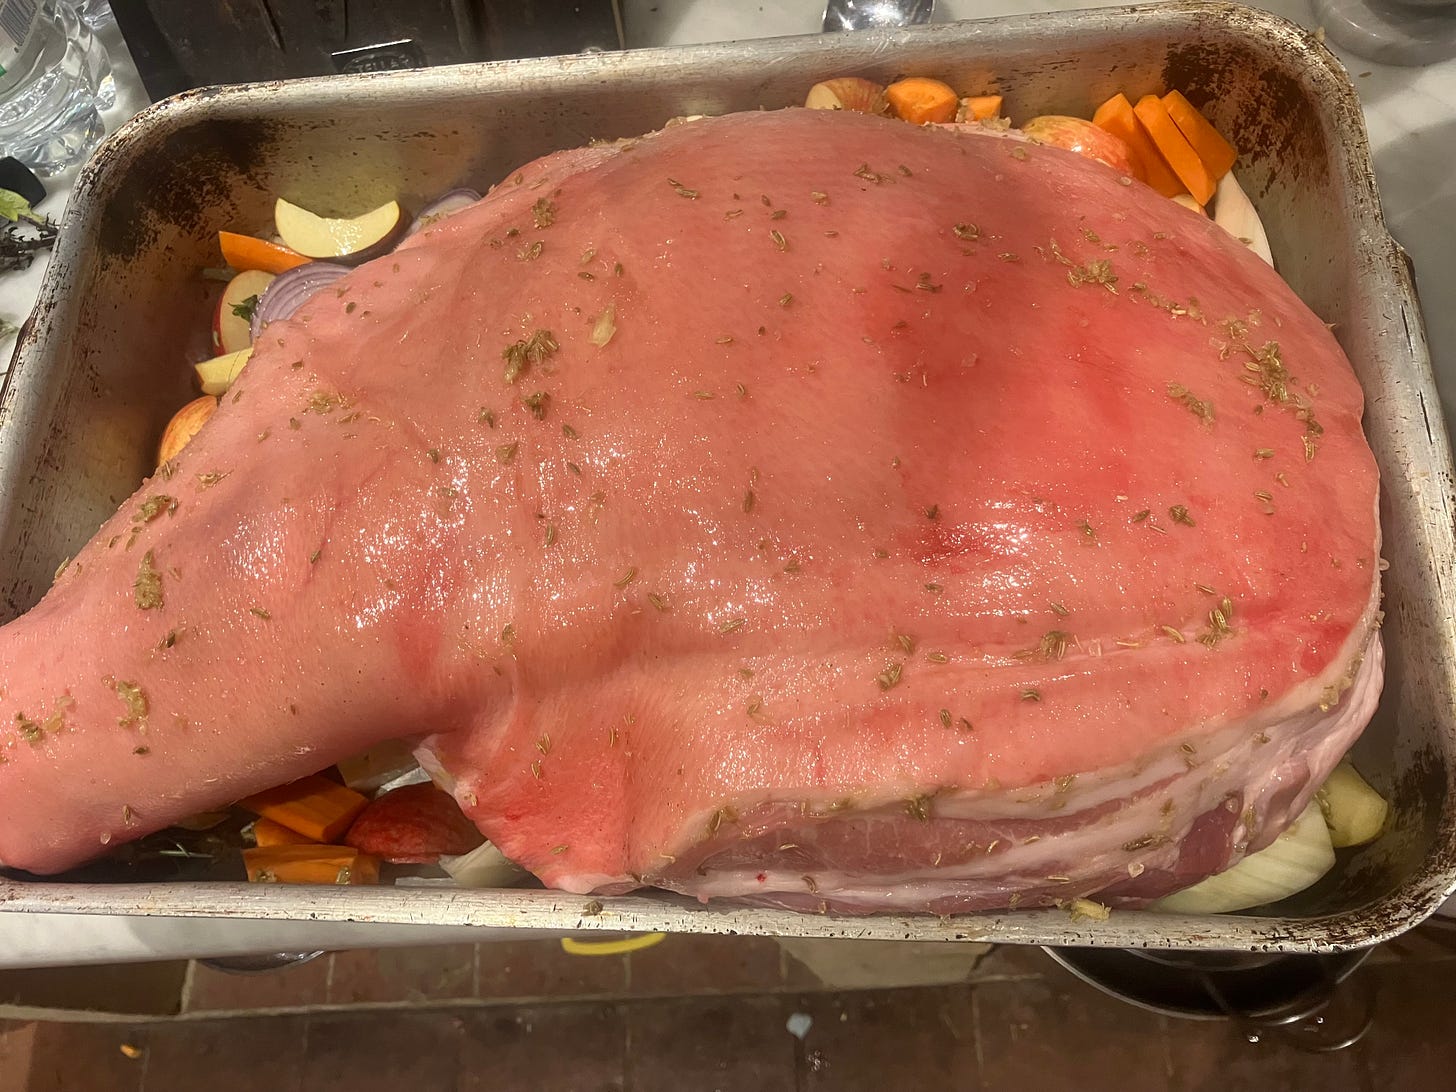 Whole shoulder of pork on a bed of vegetables ready to go into the oven